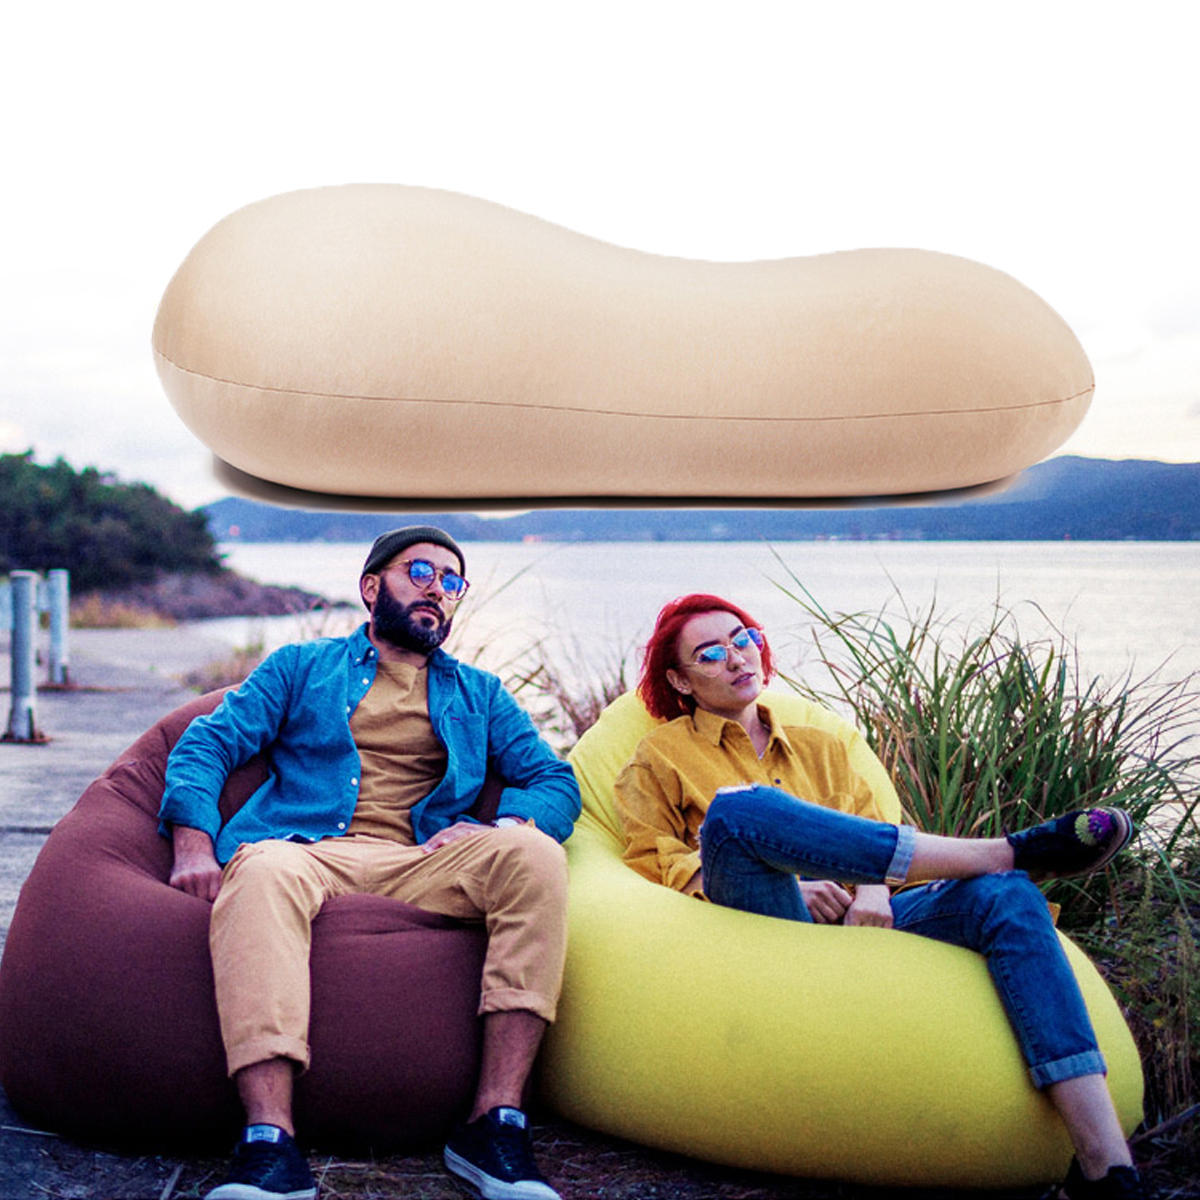 

90x110cm Outdoor Portable Lazy Bean Bag Cover Adults Sitting Couch Sofa Game Seat Lounge Dust Protector